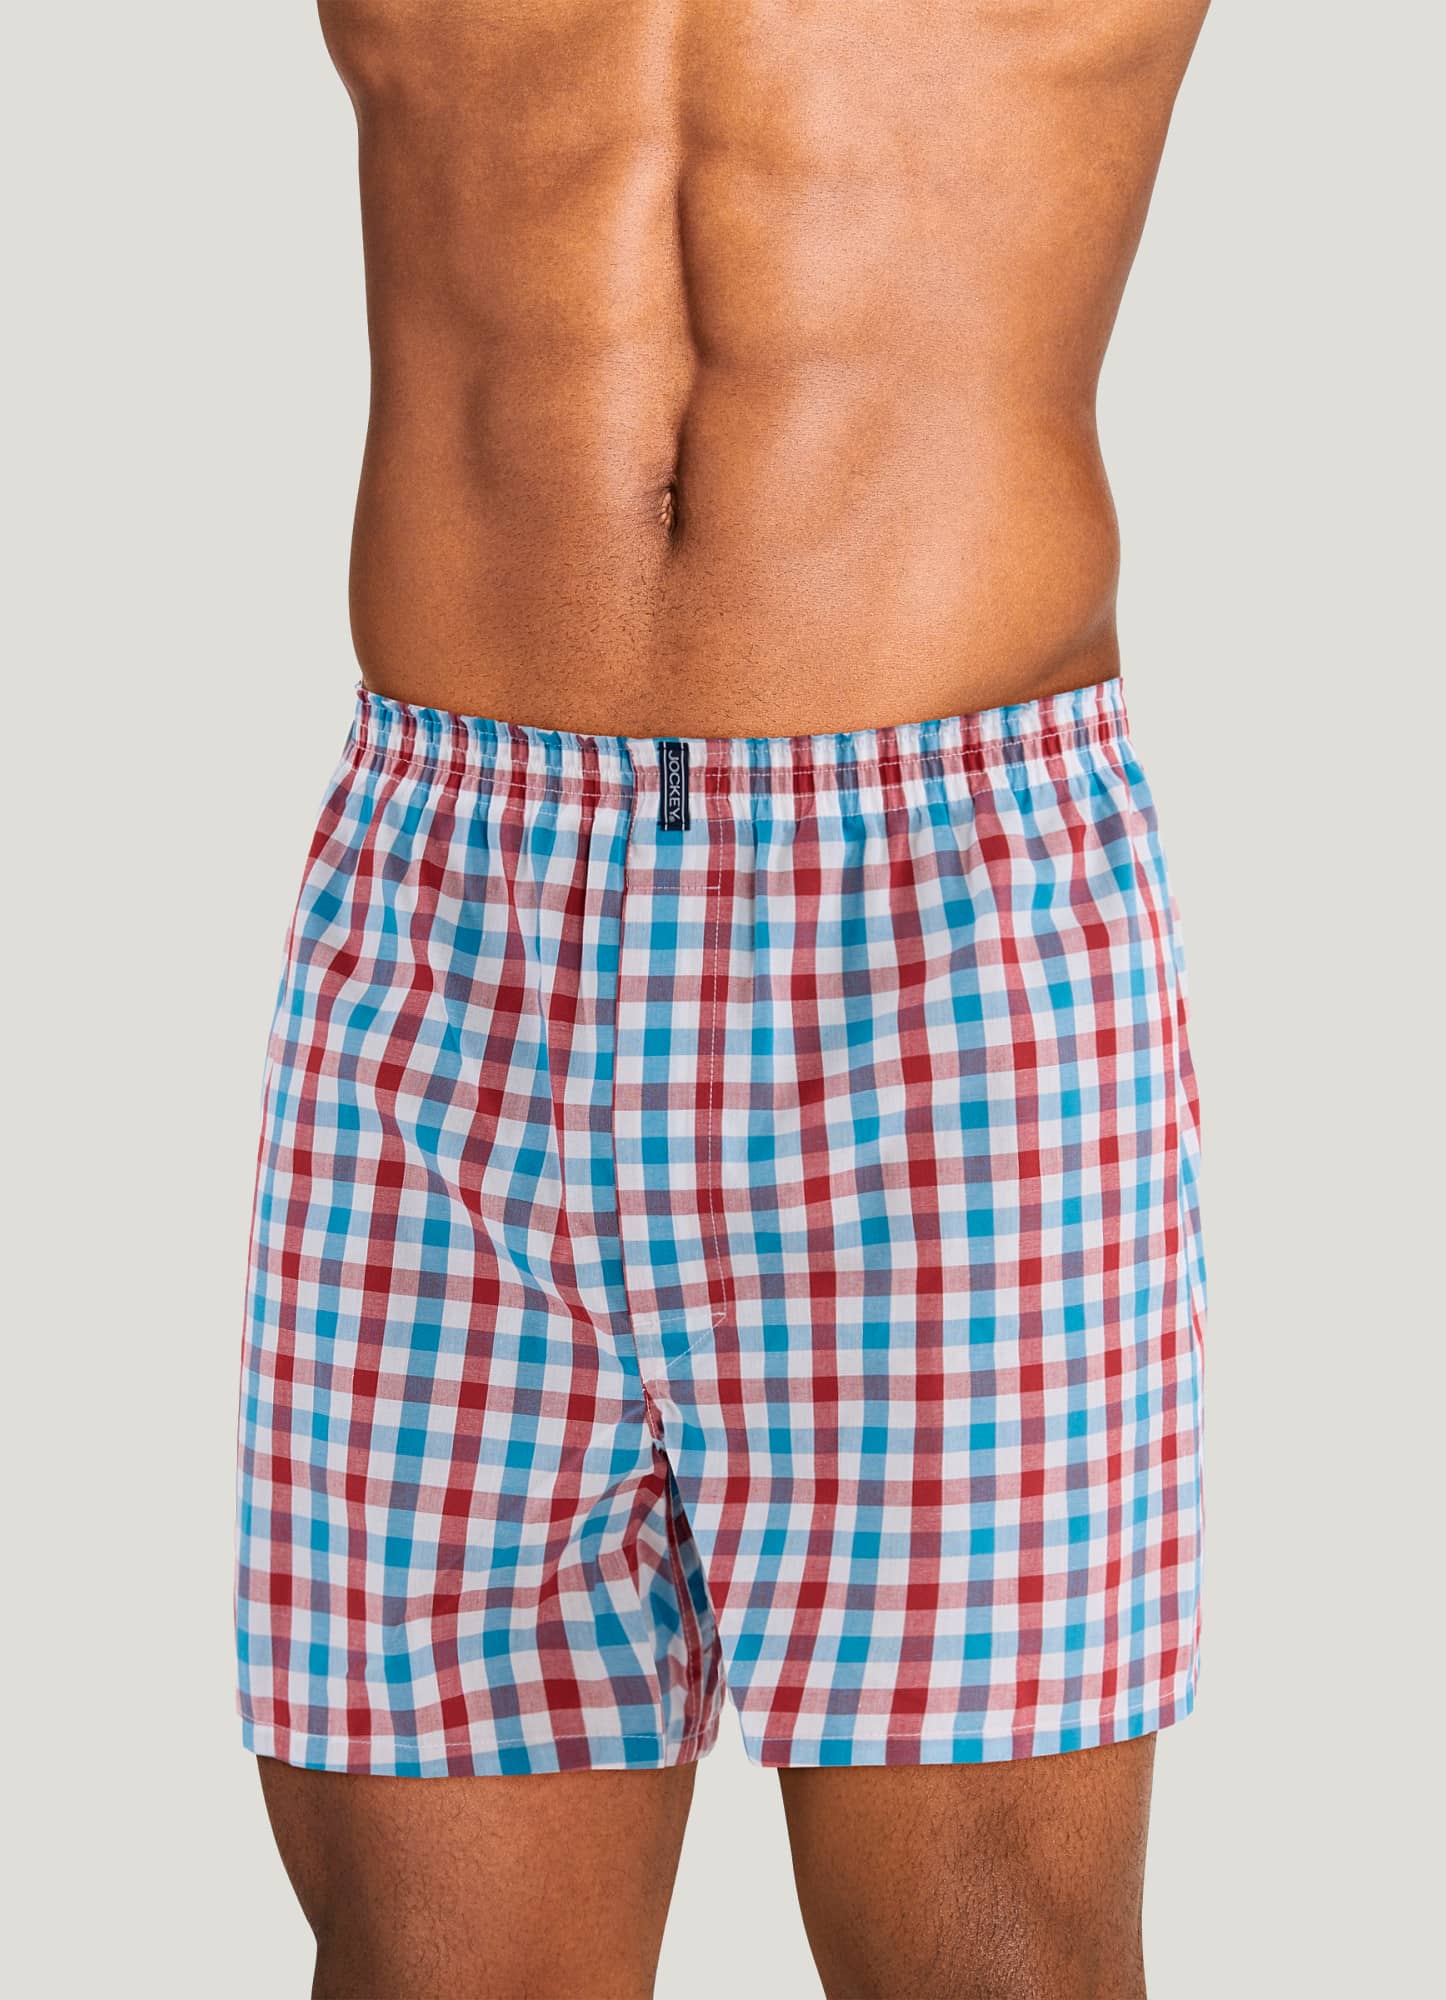 Jockey Men's Underwear Lightweight Classic Boxer Brief - 3 Pack : :  Clothing, Shoes & Accessories